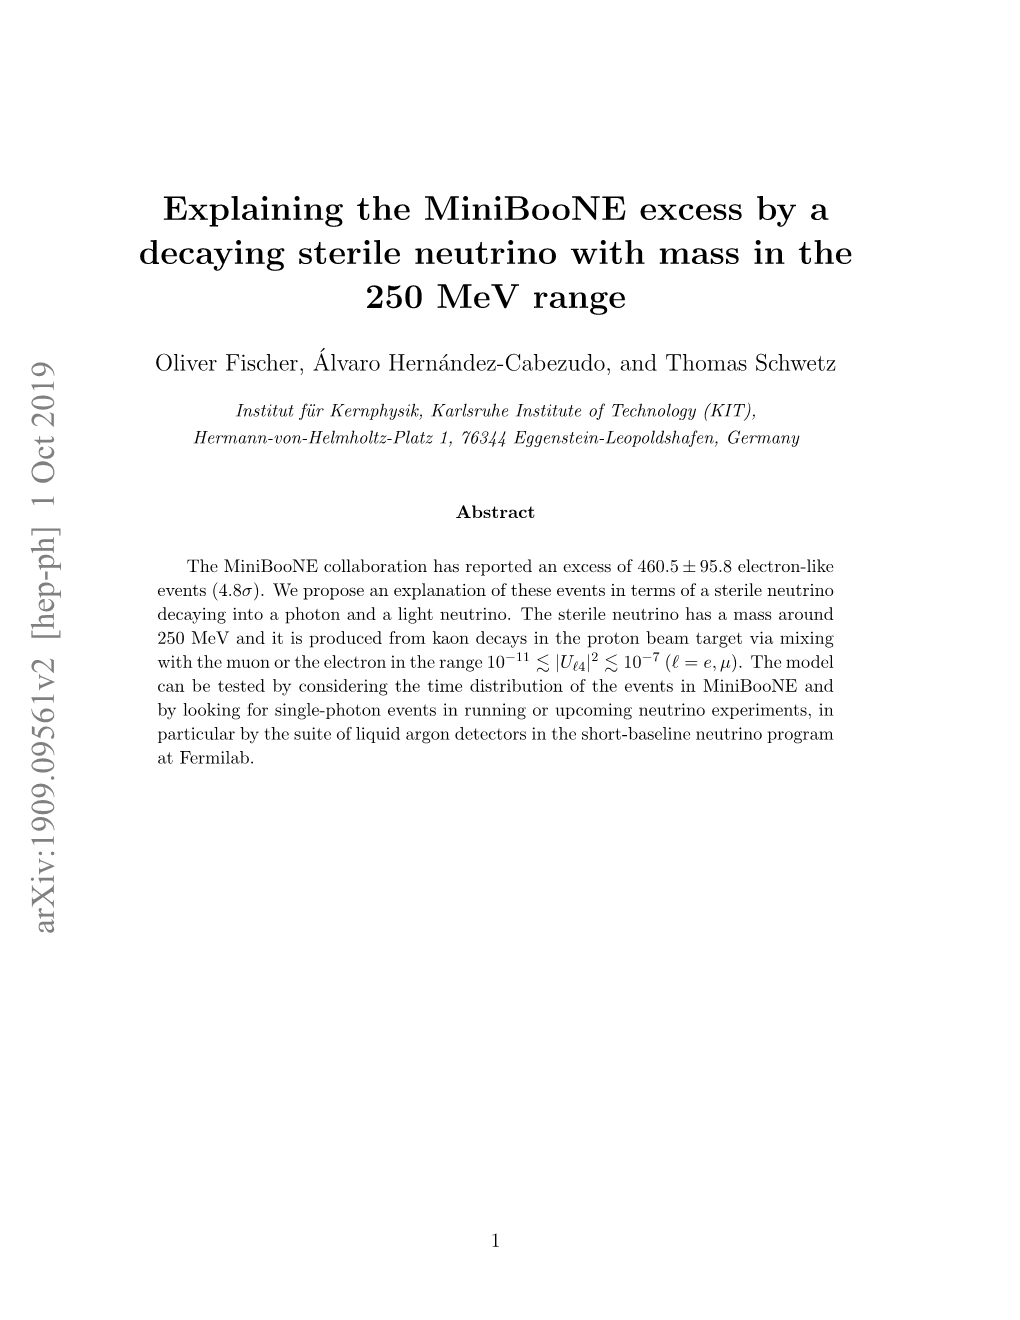 Explaining the Miniboone Excess by a Decaying Sterile Neutrino with Mass in the 250 Mev Range